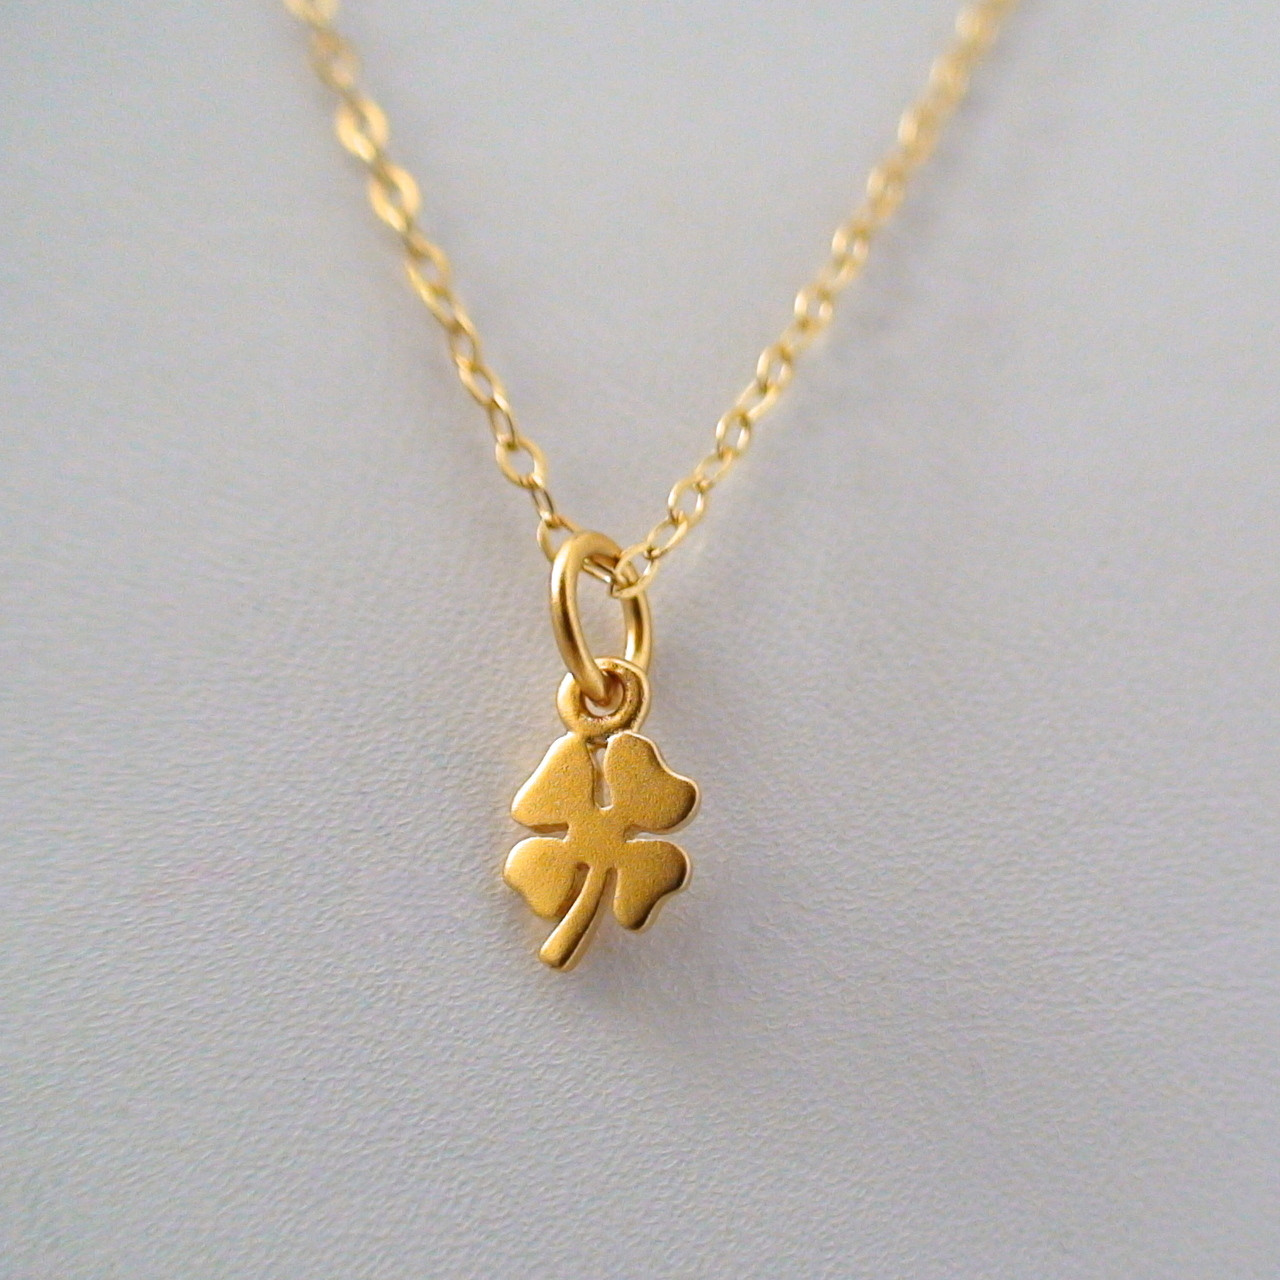 The Gold Four Leaf Clover Necklace